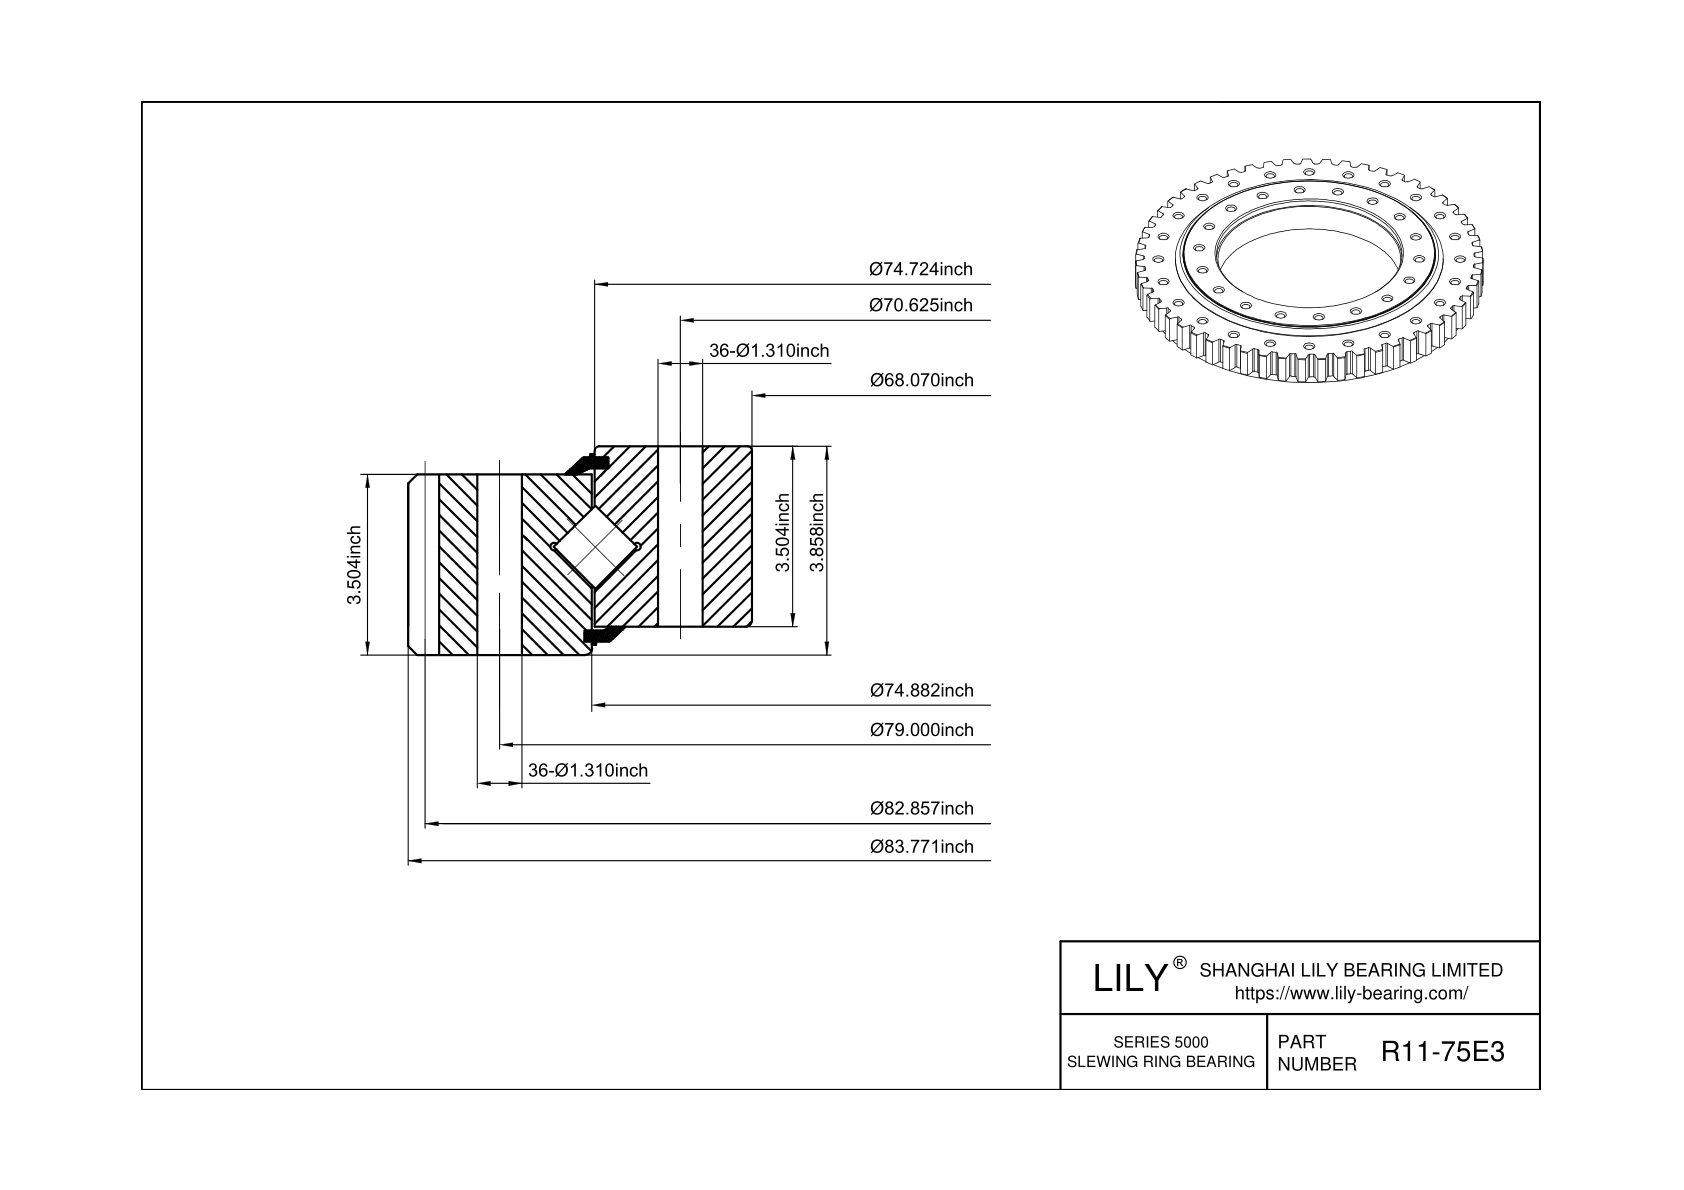 R11-75E3 Cross Roller Slewing Ring Bearing cad drawing